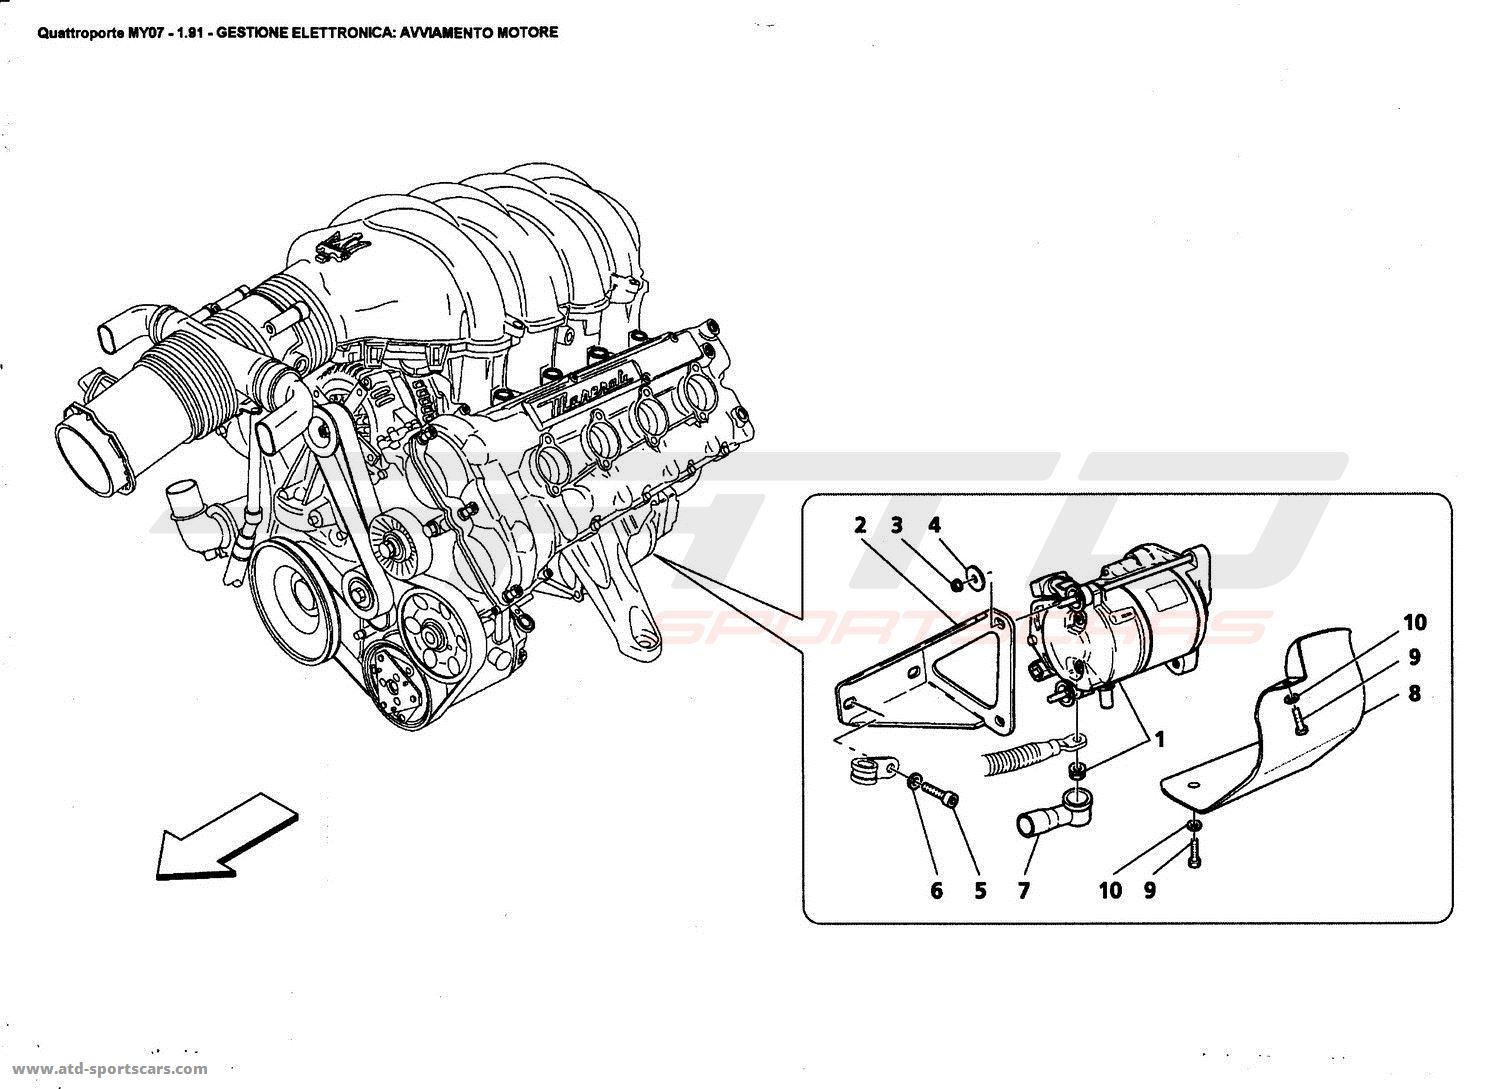 ELECTRONIC CONTROL: ENGINE STARTING